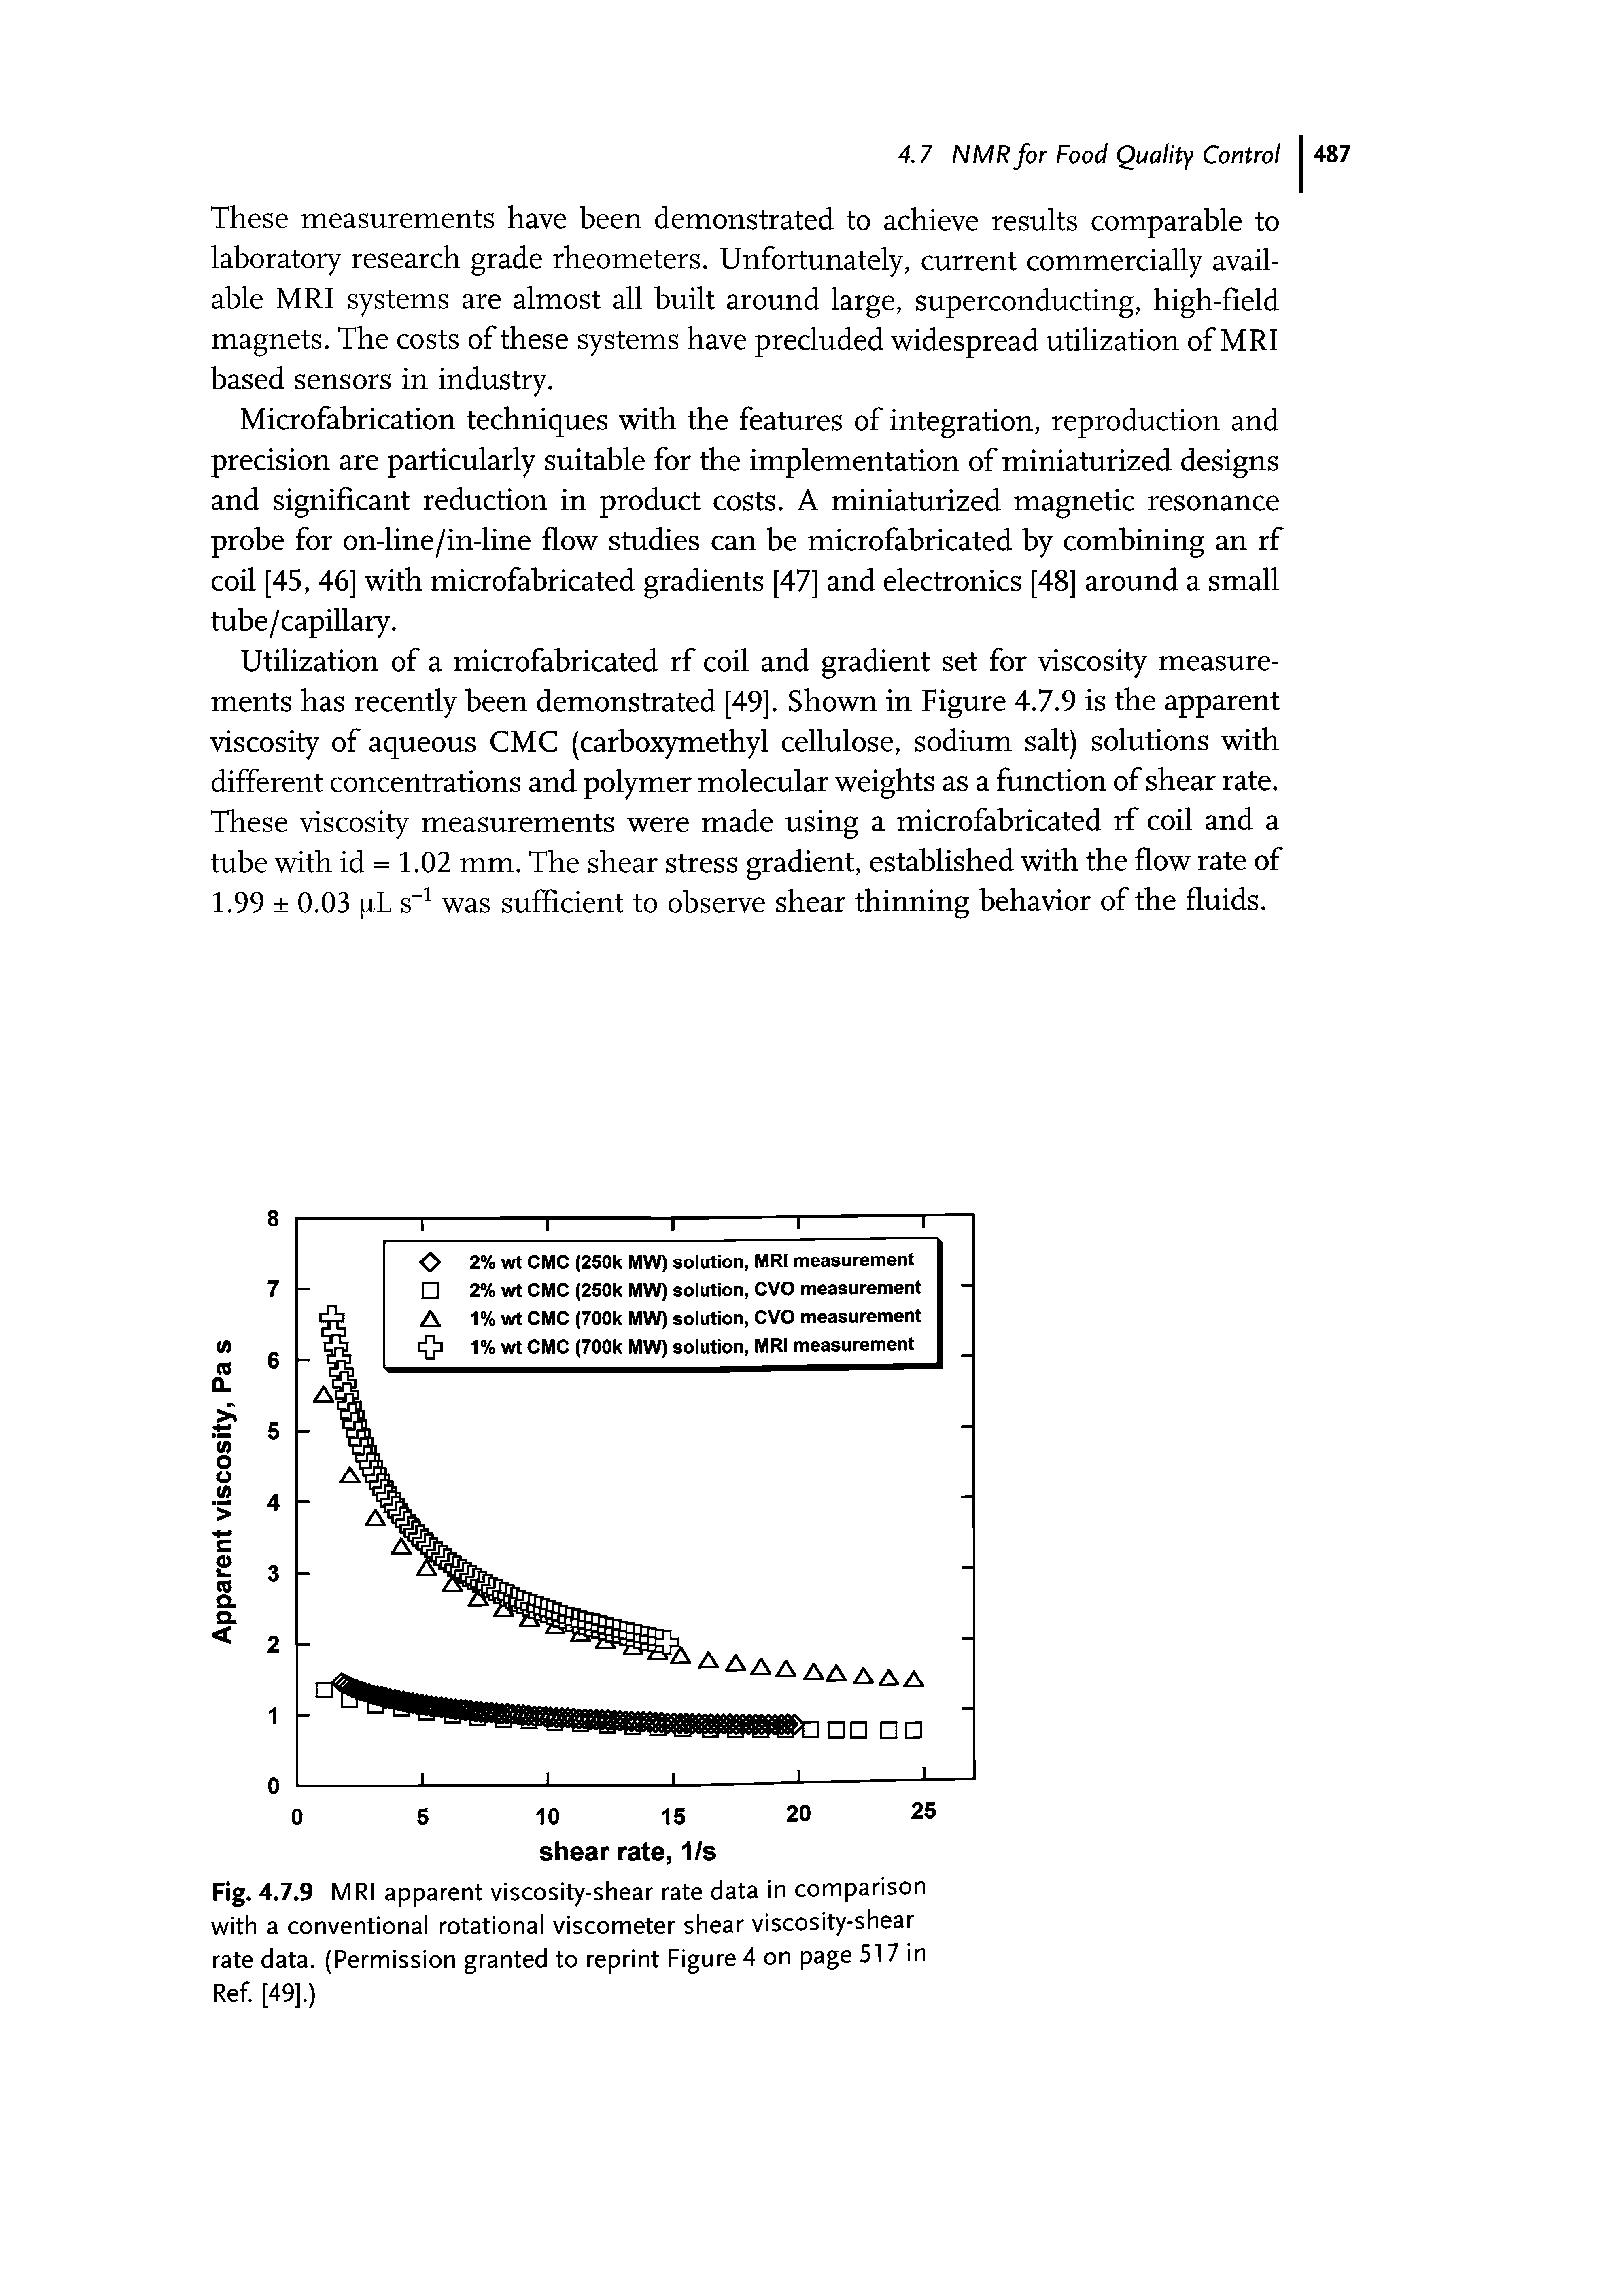 Fig. 4.7.9 MRI apparent viscosity-shear rate data in comparison with a conventional rotational viscometer shear viscosity-shear rate data. (Permission granted to reprint Figure 4 on page 517 in Ref. [49].)...